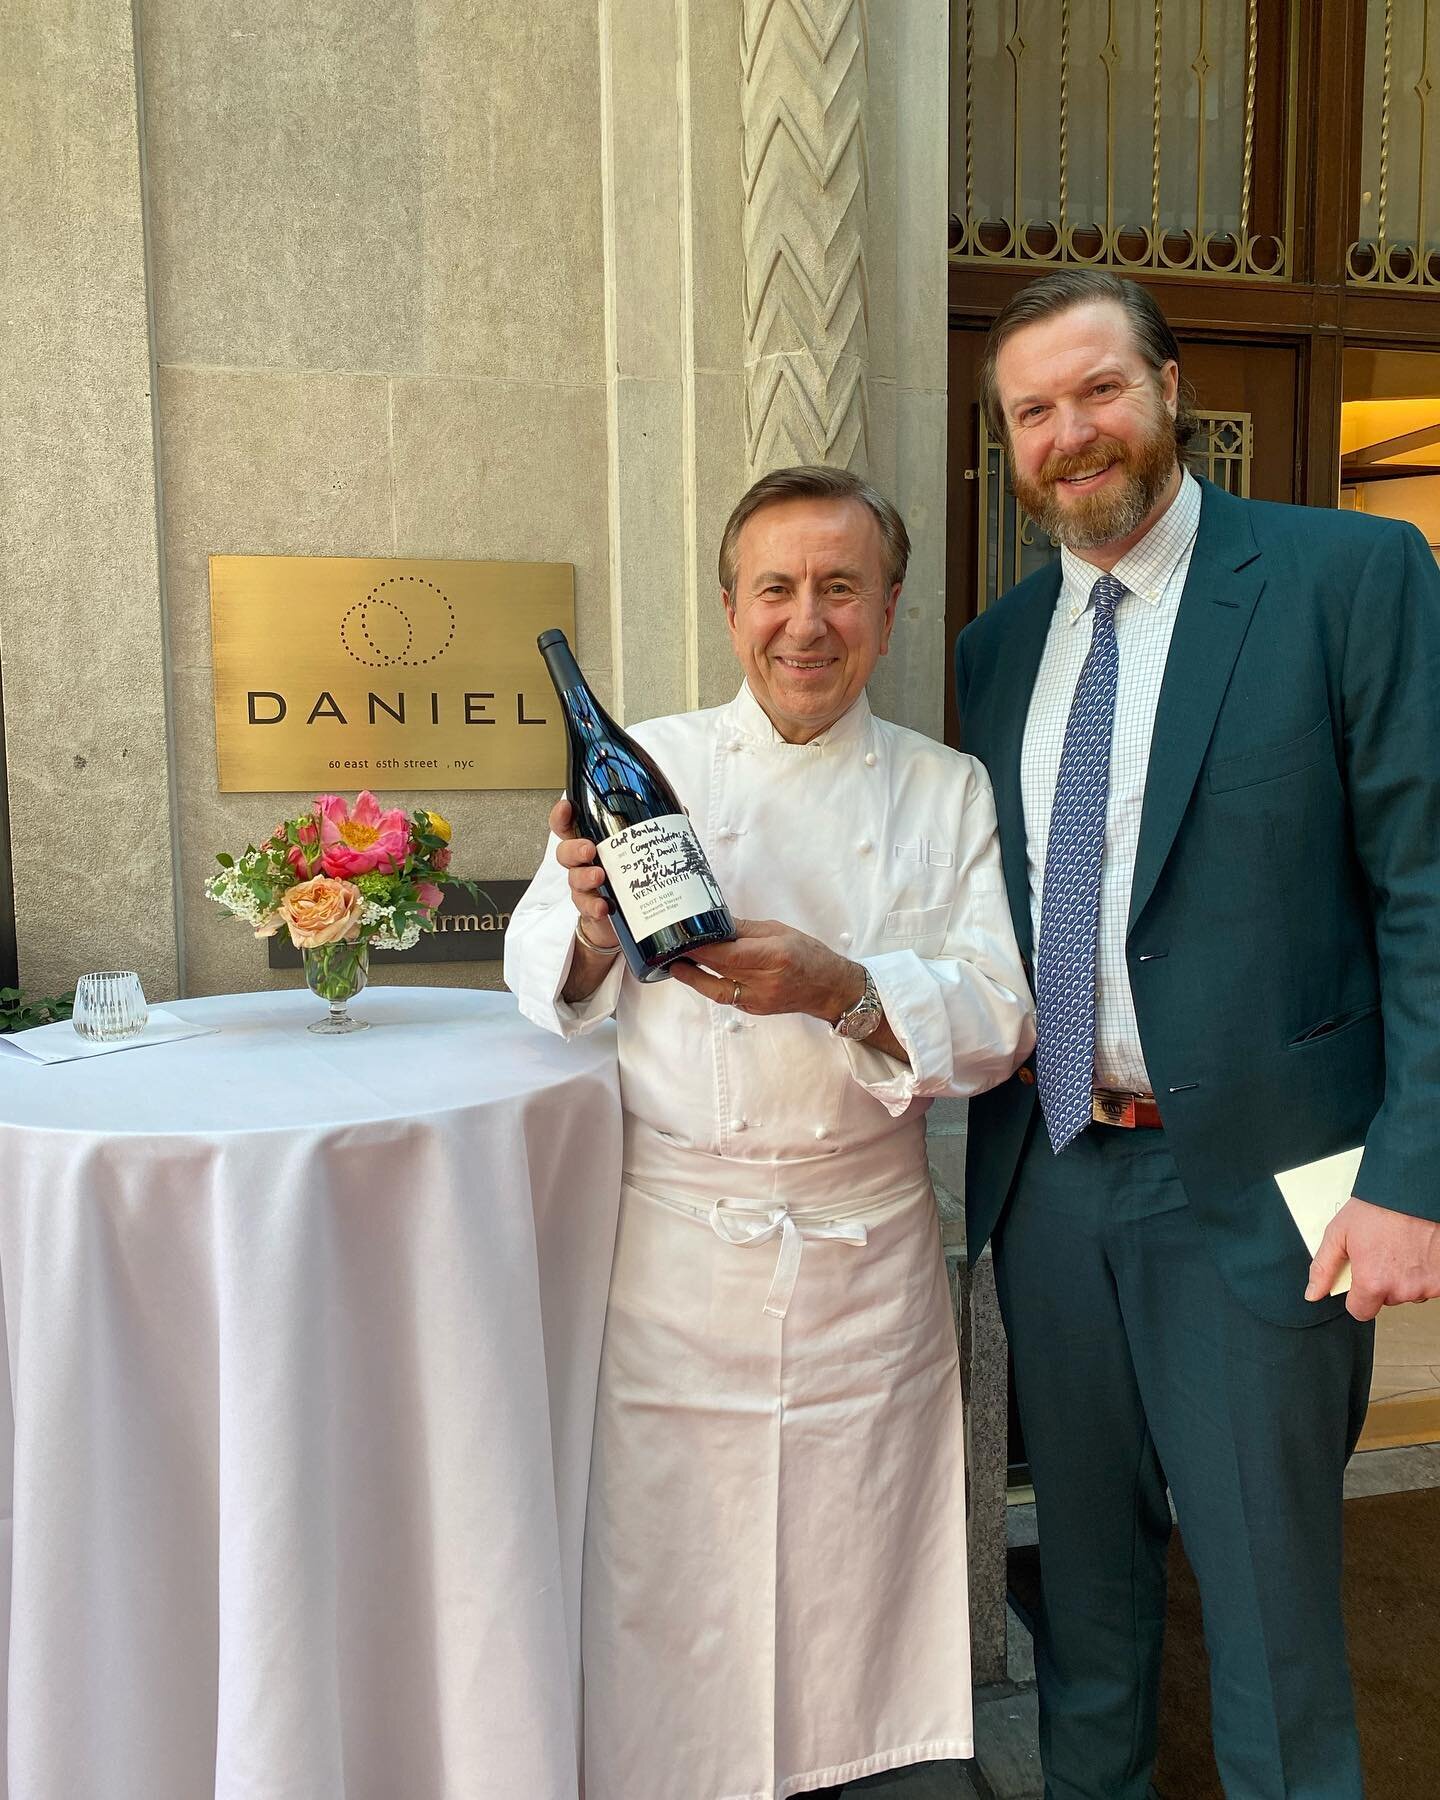 Congratulations to @danielboulud on the 30th anniversary of Restaurant Daniel and a sincere thank you for a wonderful celebration of this milestone! 
Hearty congratulations also to Elvir, Ian, Chris, and the many unpictured but deeply valued friends 